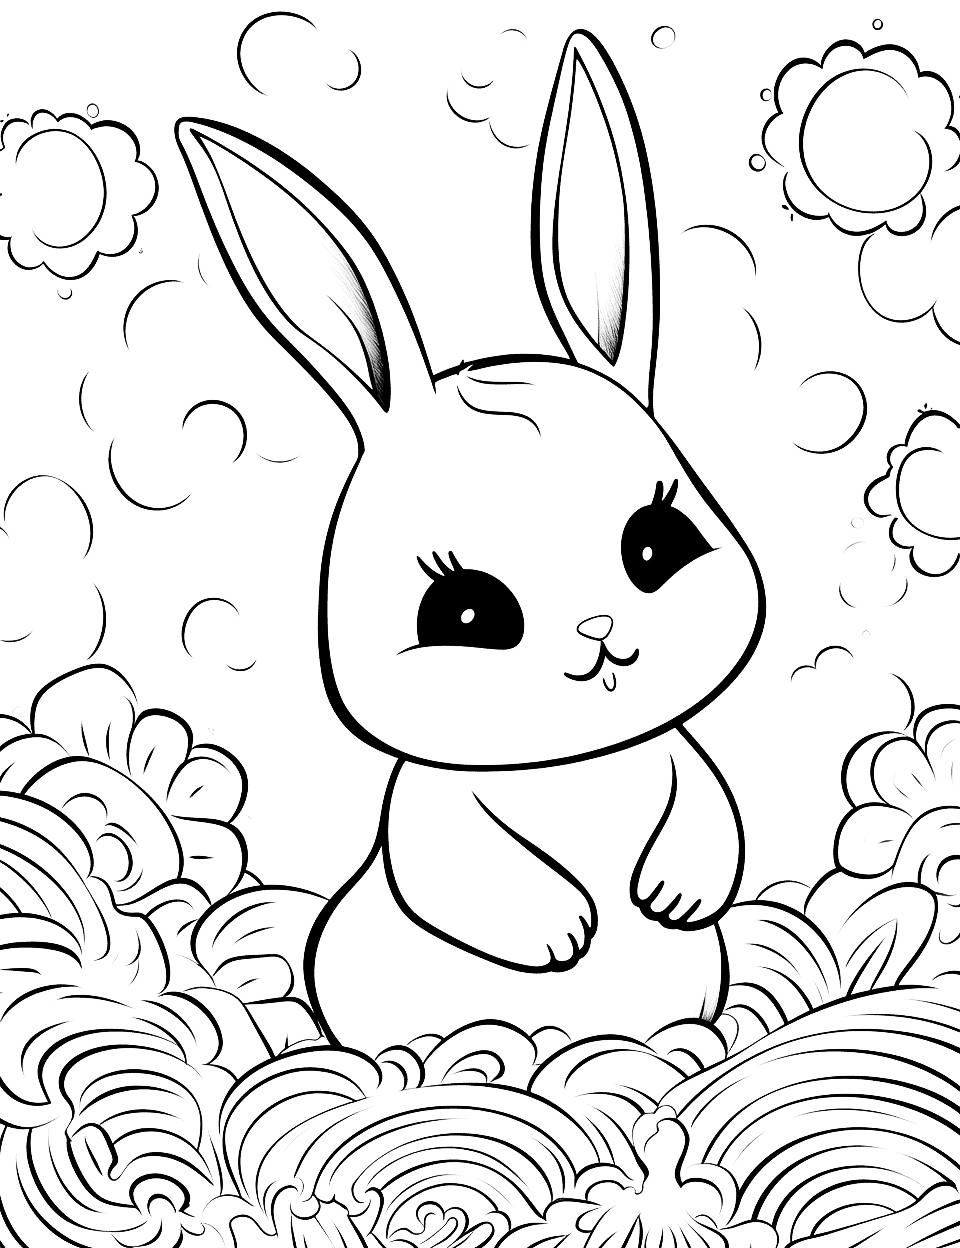 Toddler's Bunny Dream Coloring Page - A very basic drawing focusing on broad strokes suitable for a toddler’s coloring.